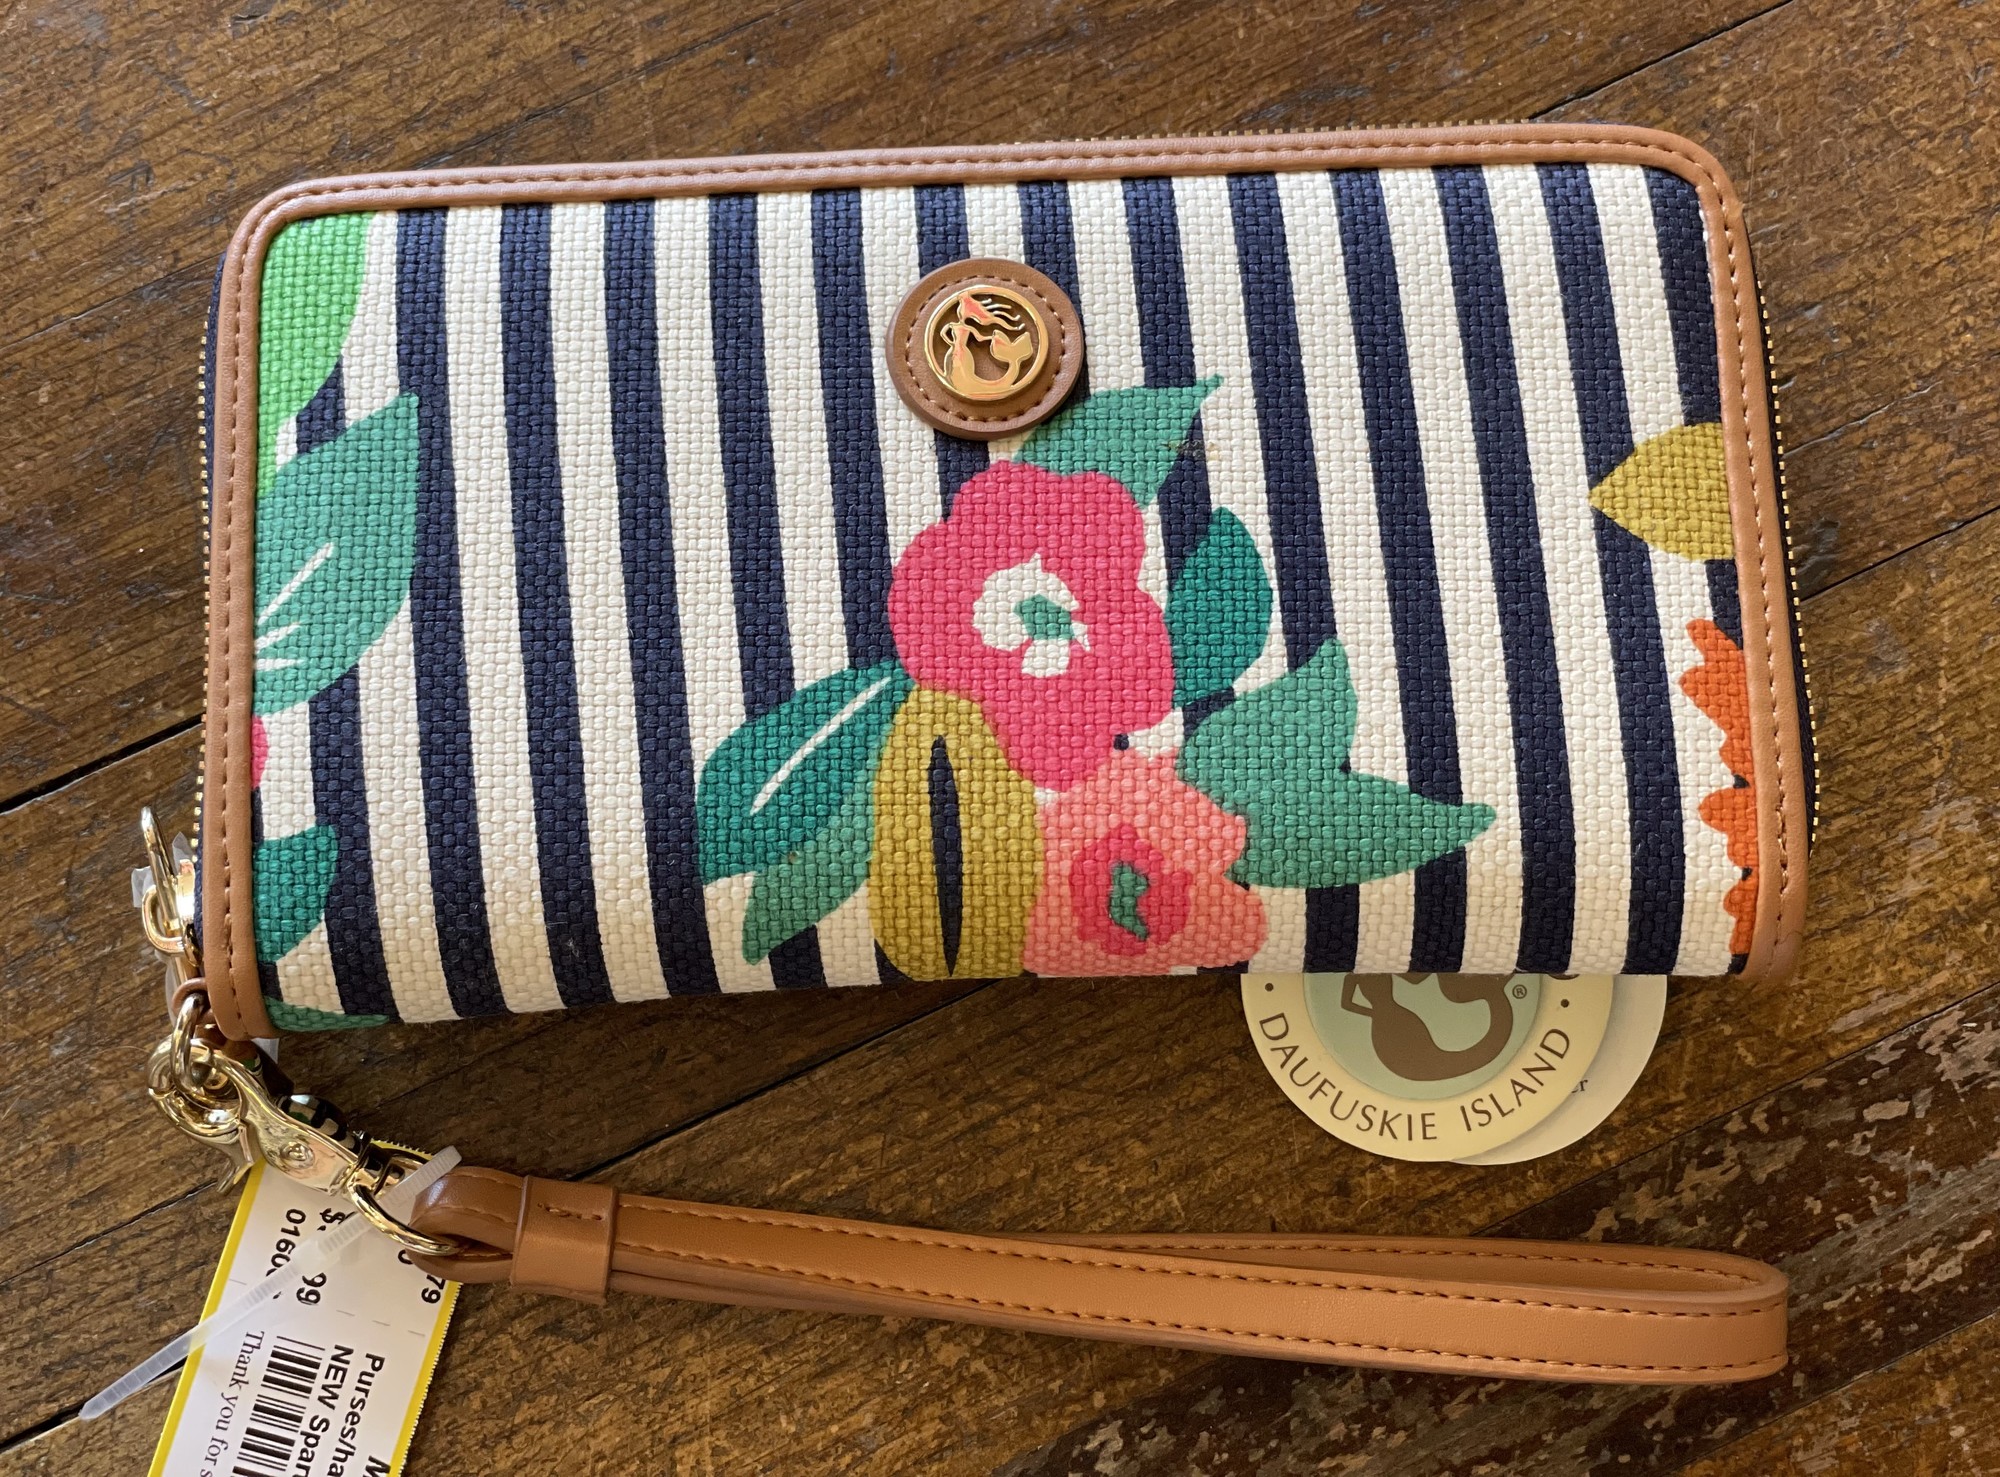 NEW Spartina Shelter Cove,
Navy, white, pink, green, mustard
Size: 8 wide x 4.5 high
Natural linen and genuine leather
RETAIL PRICE: $62.00